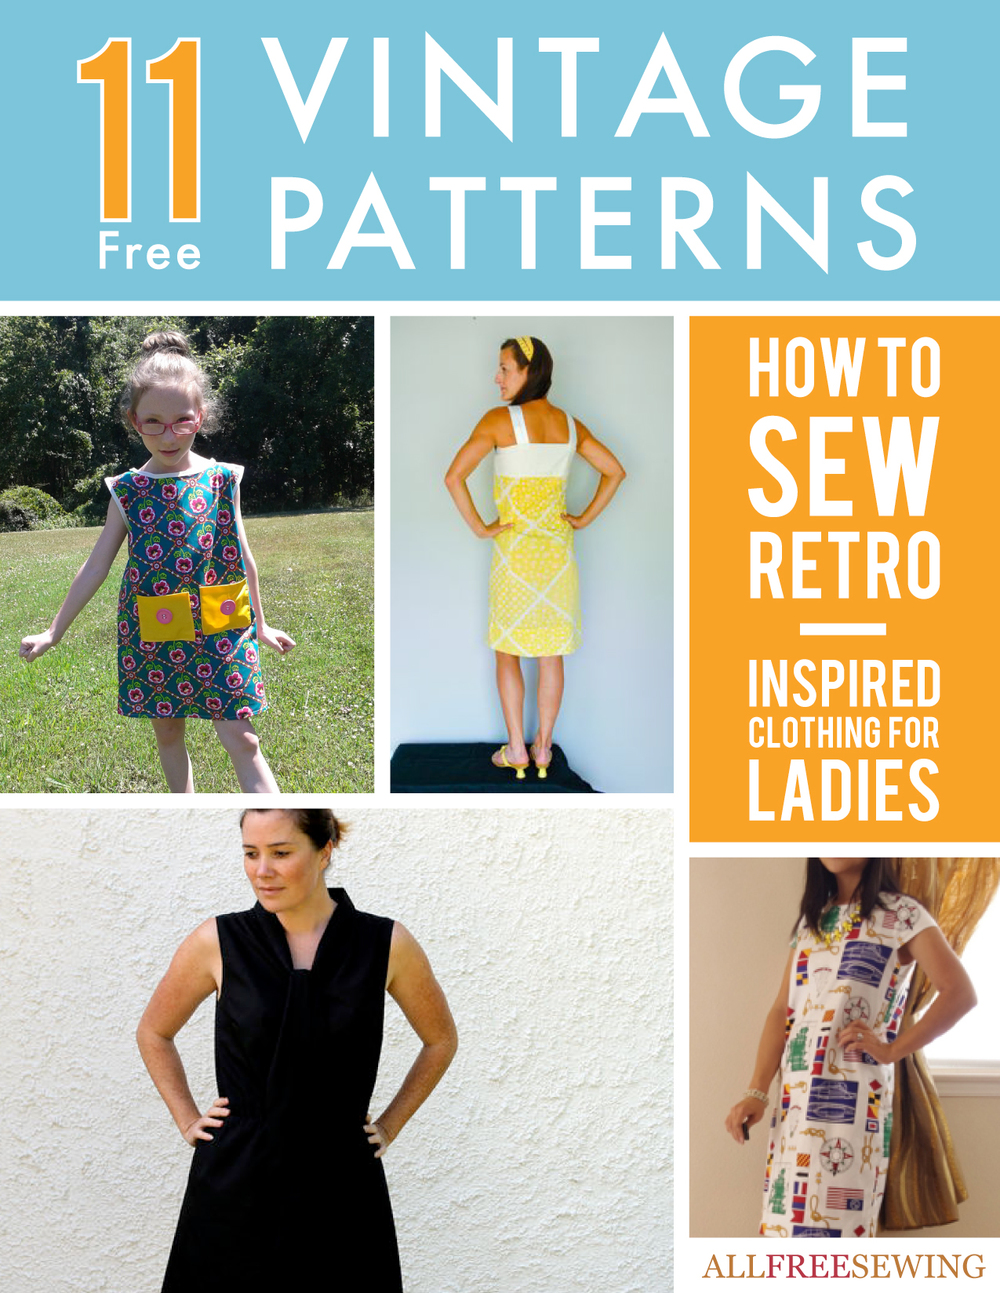 Free Vintage Patterns: 11 Retro-Inspired Clothing for Ladies Free eBook